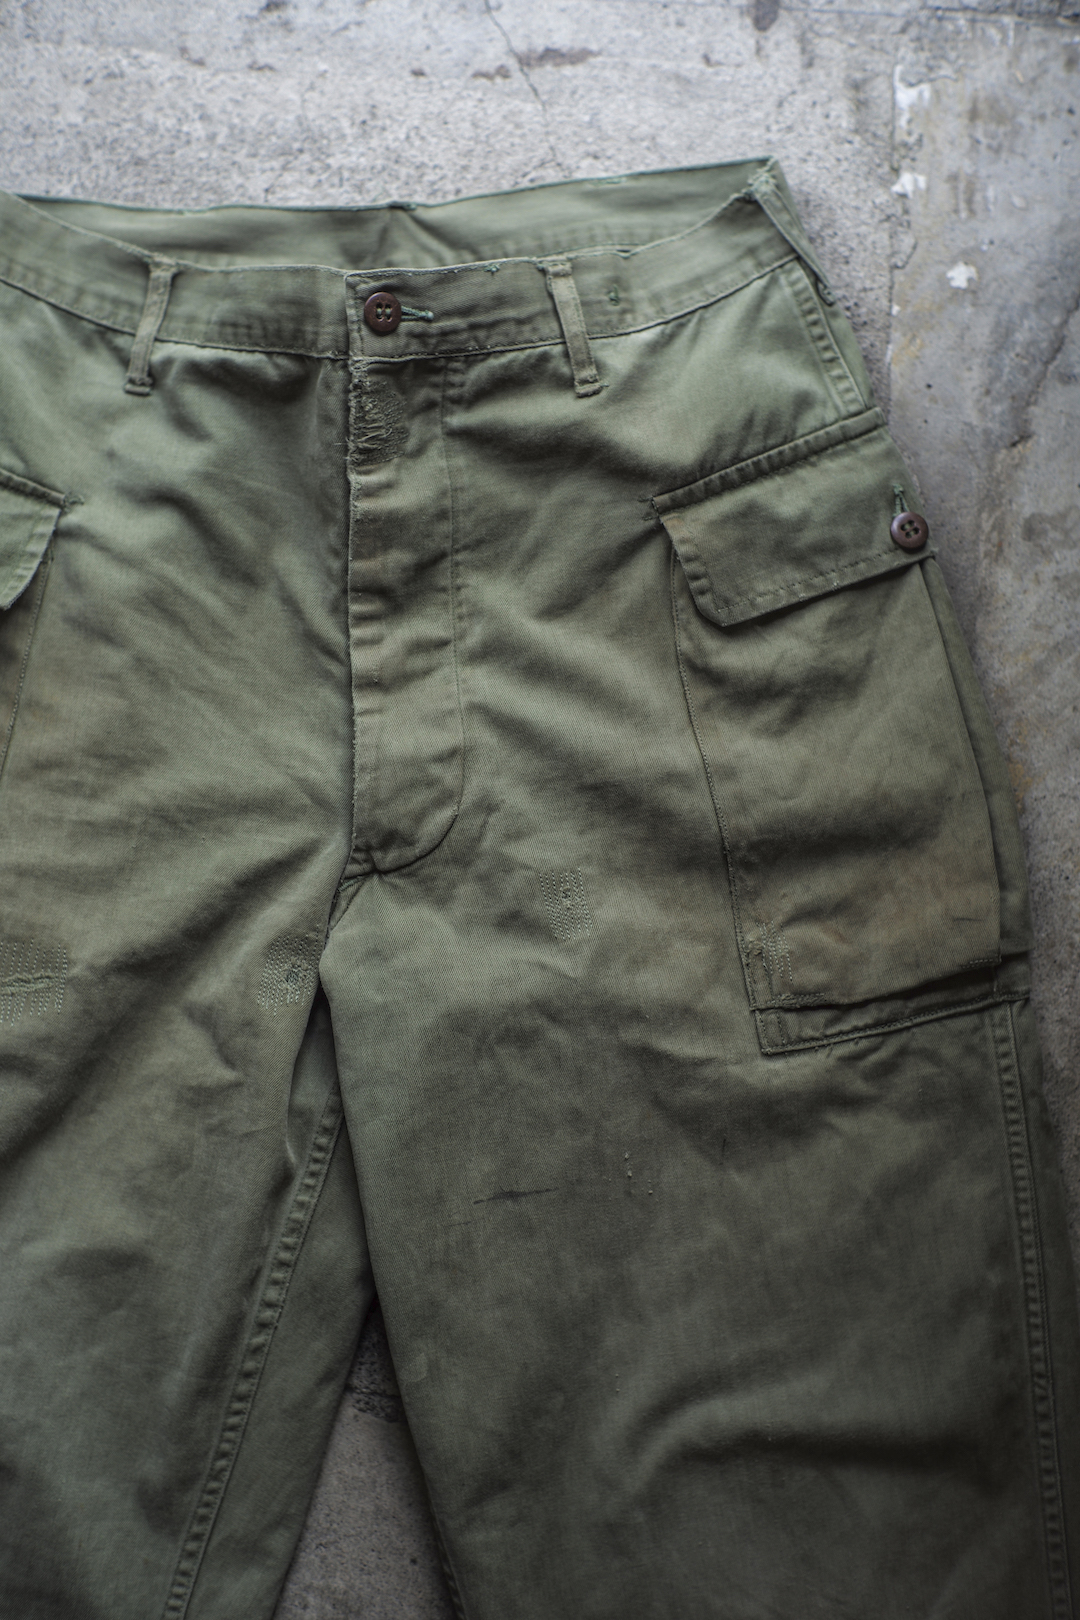 US ARMY M43 FIELD TROUSERS SIDE POCKET